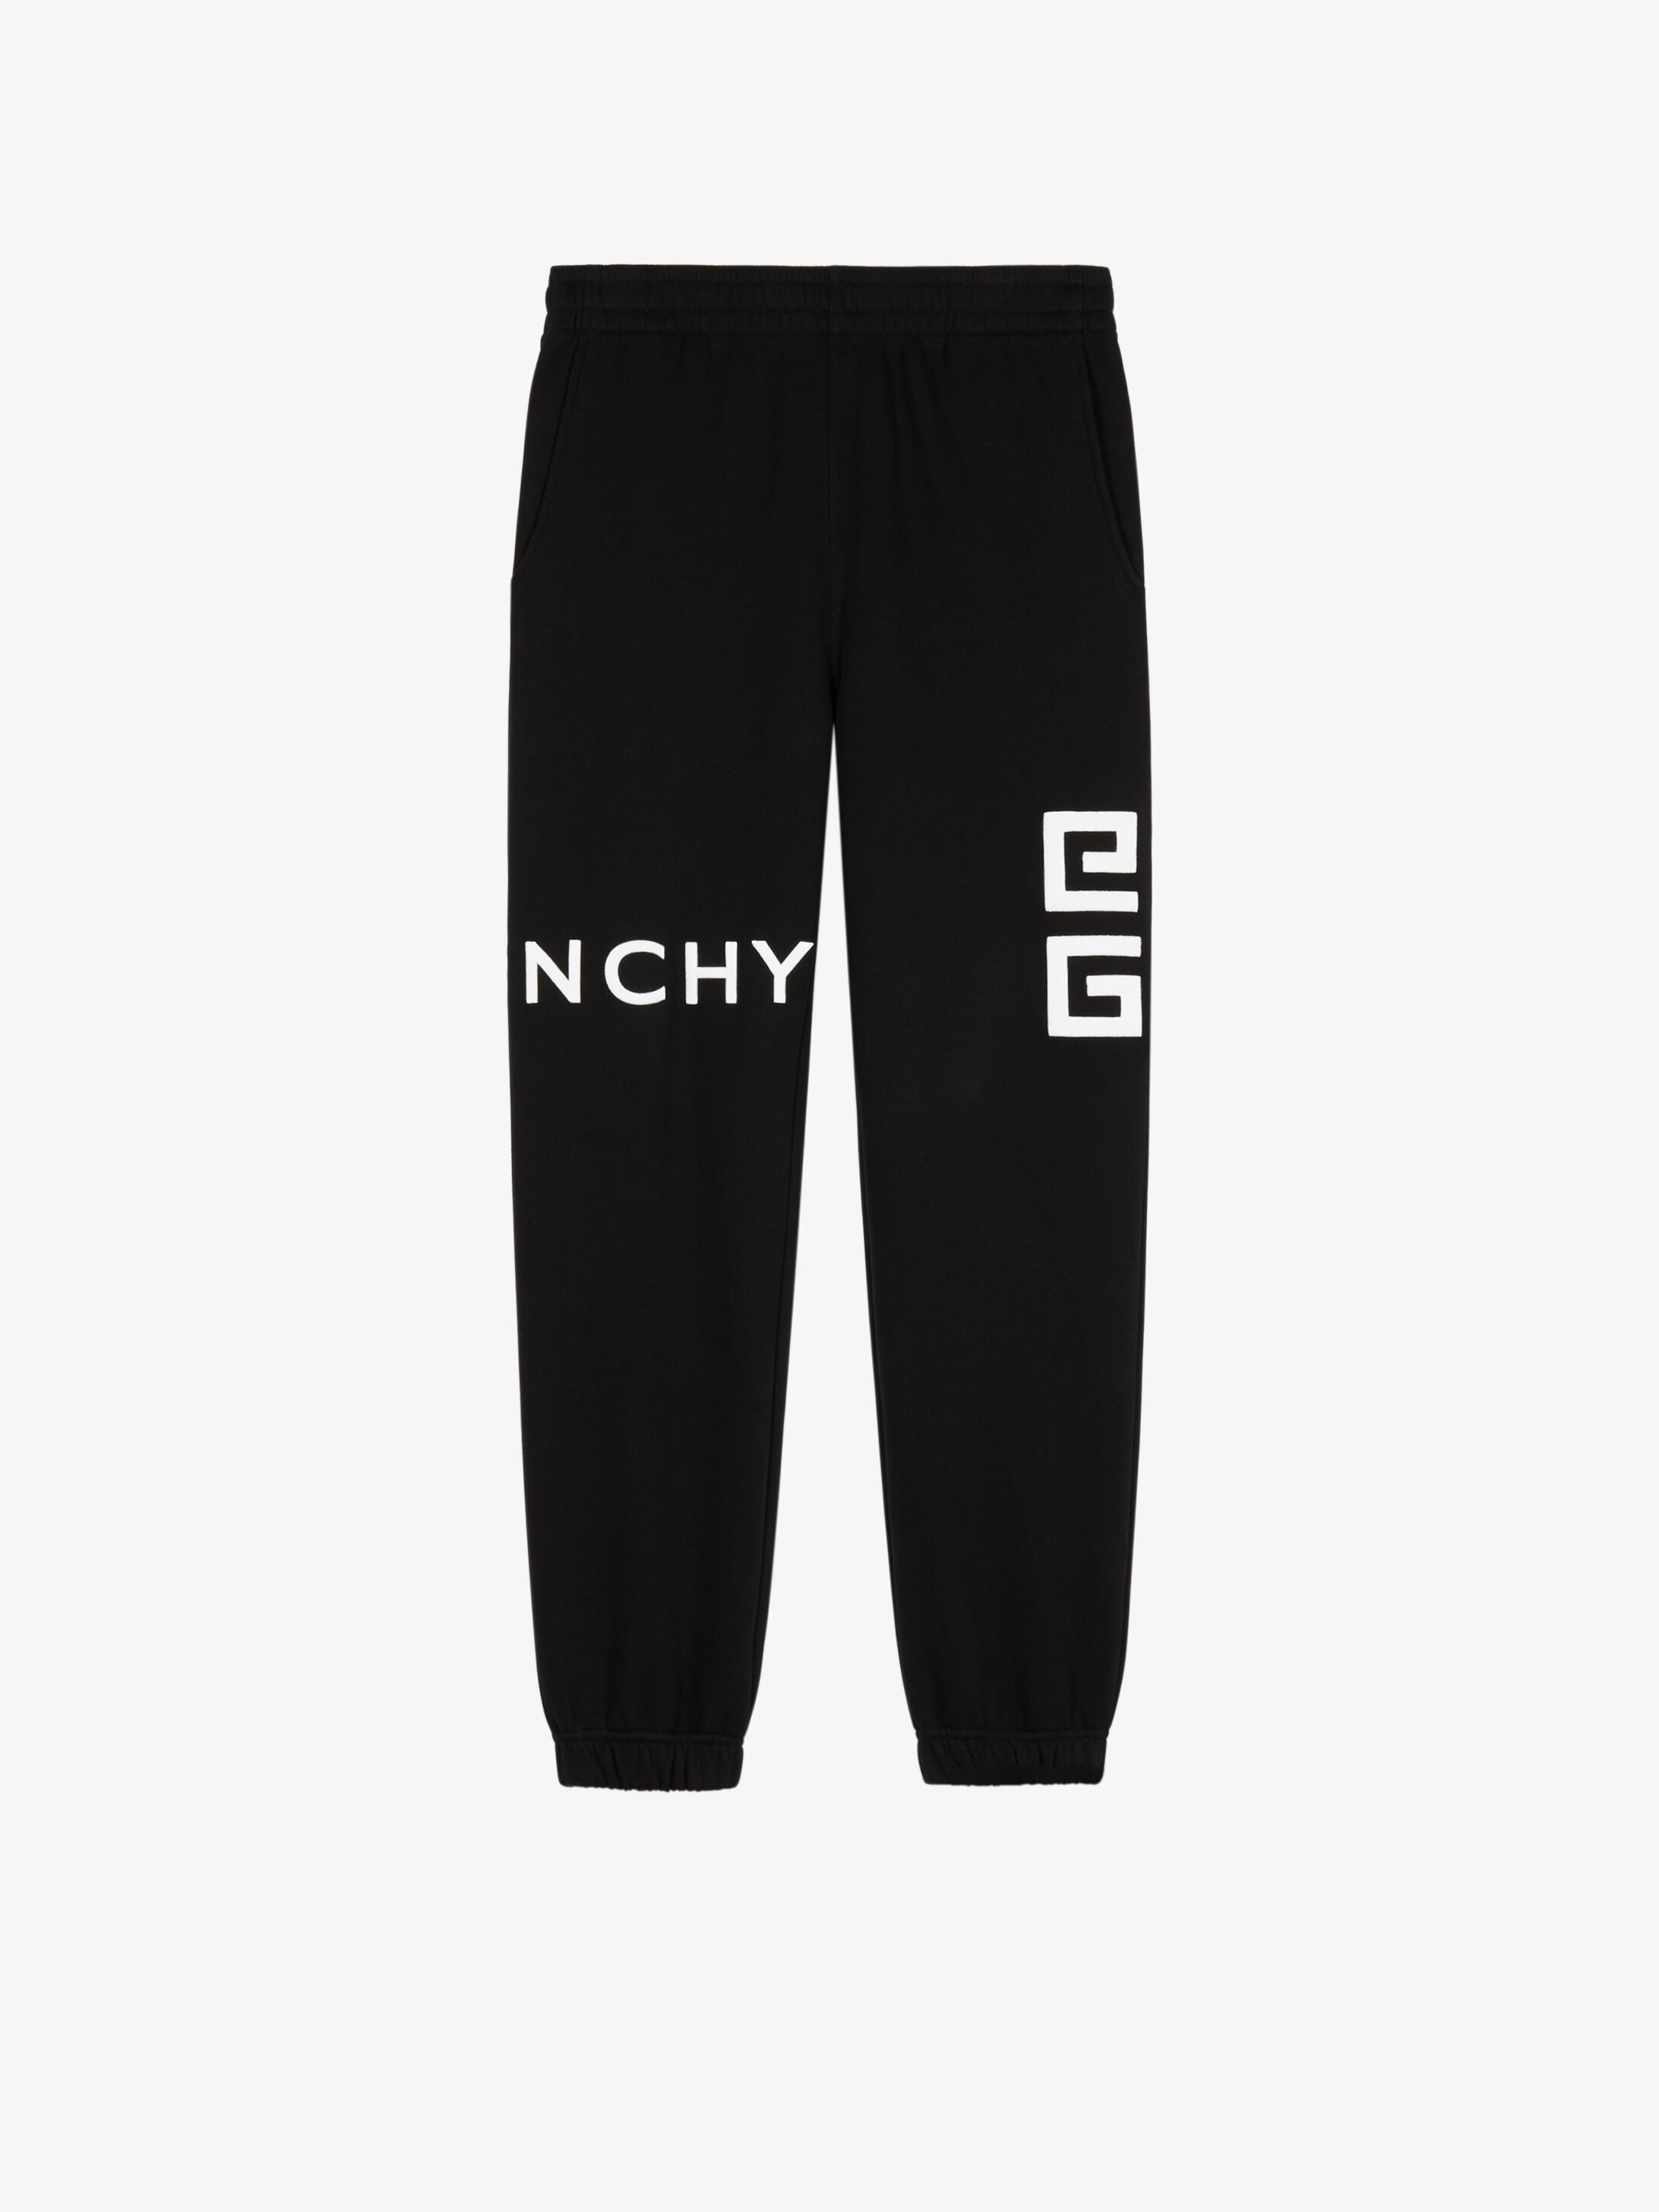 GIVENCHY 4G embroidered slim fit jogger pants | GIVENCHY Paris